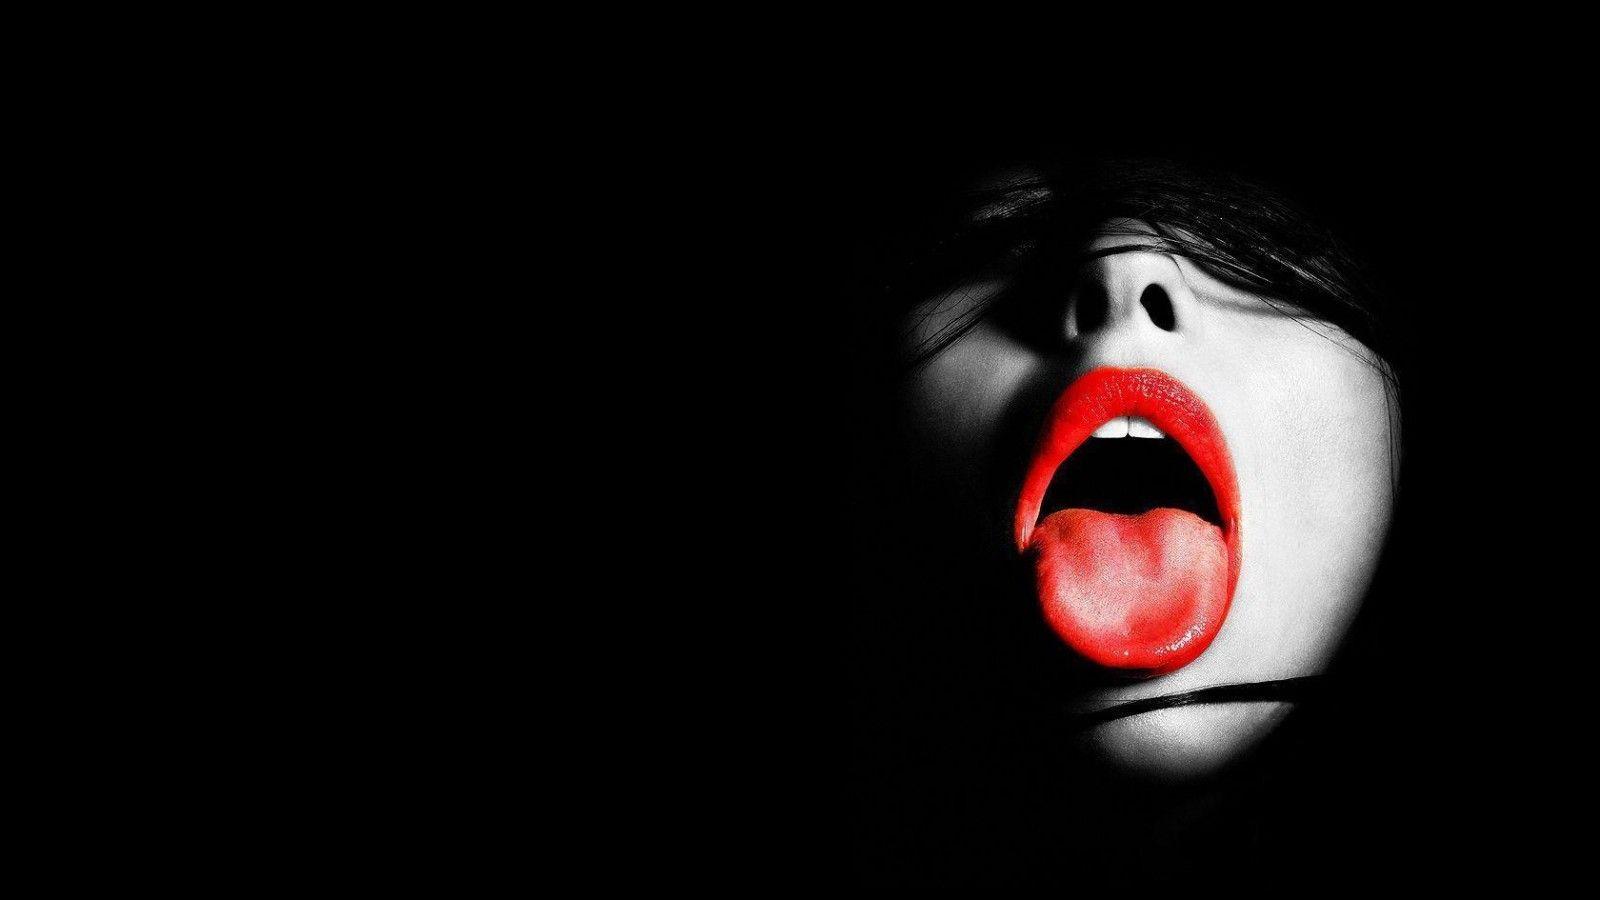 Red Lip and Toungue Logo - Red Lips Tongue Black Background Wallpaper 28454